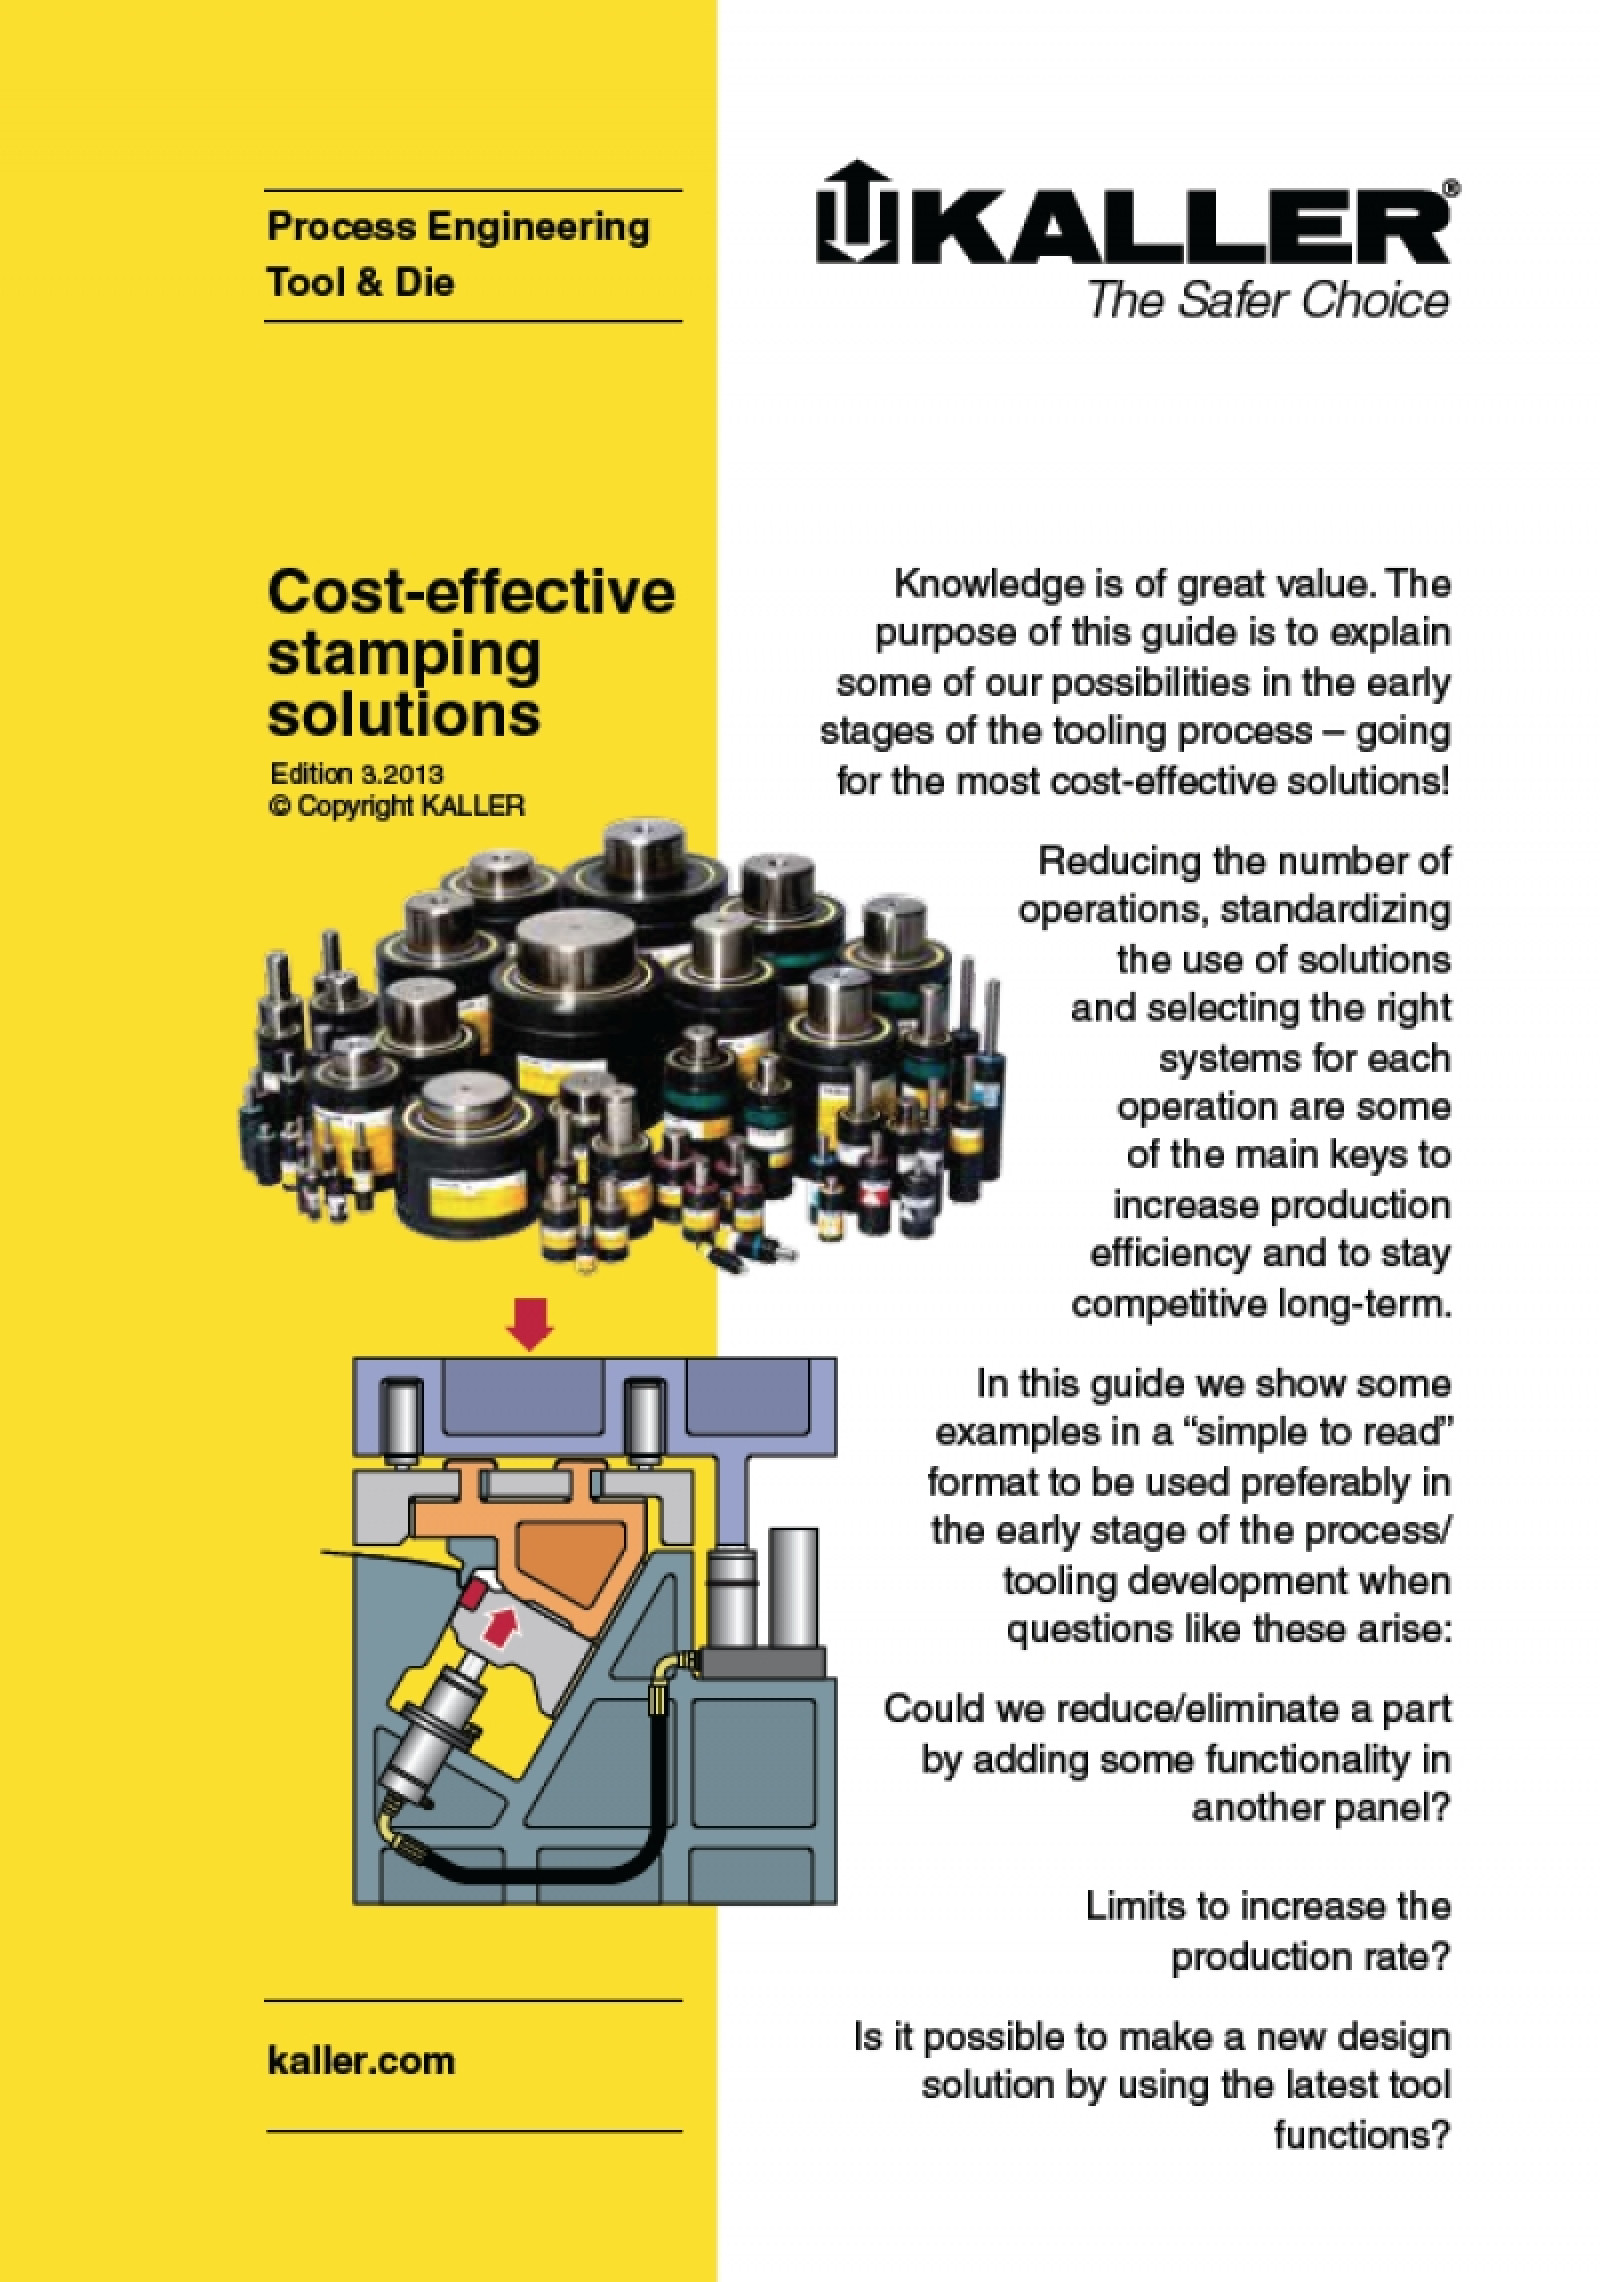 Cost-effective stamping solutions